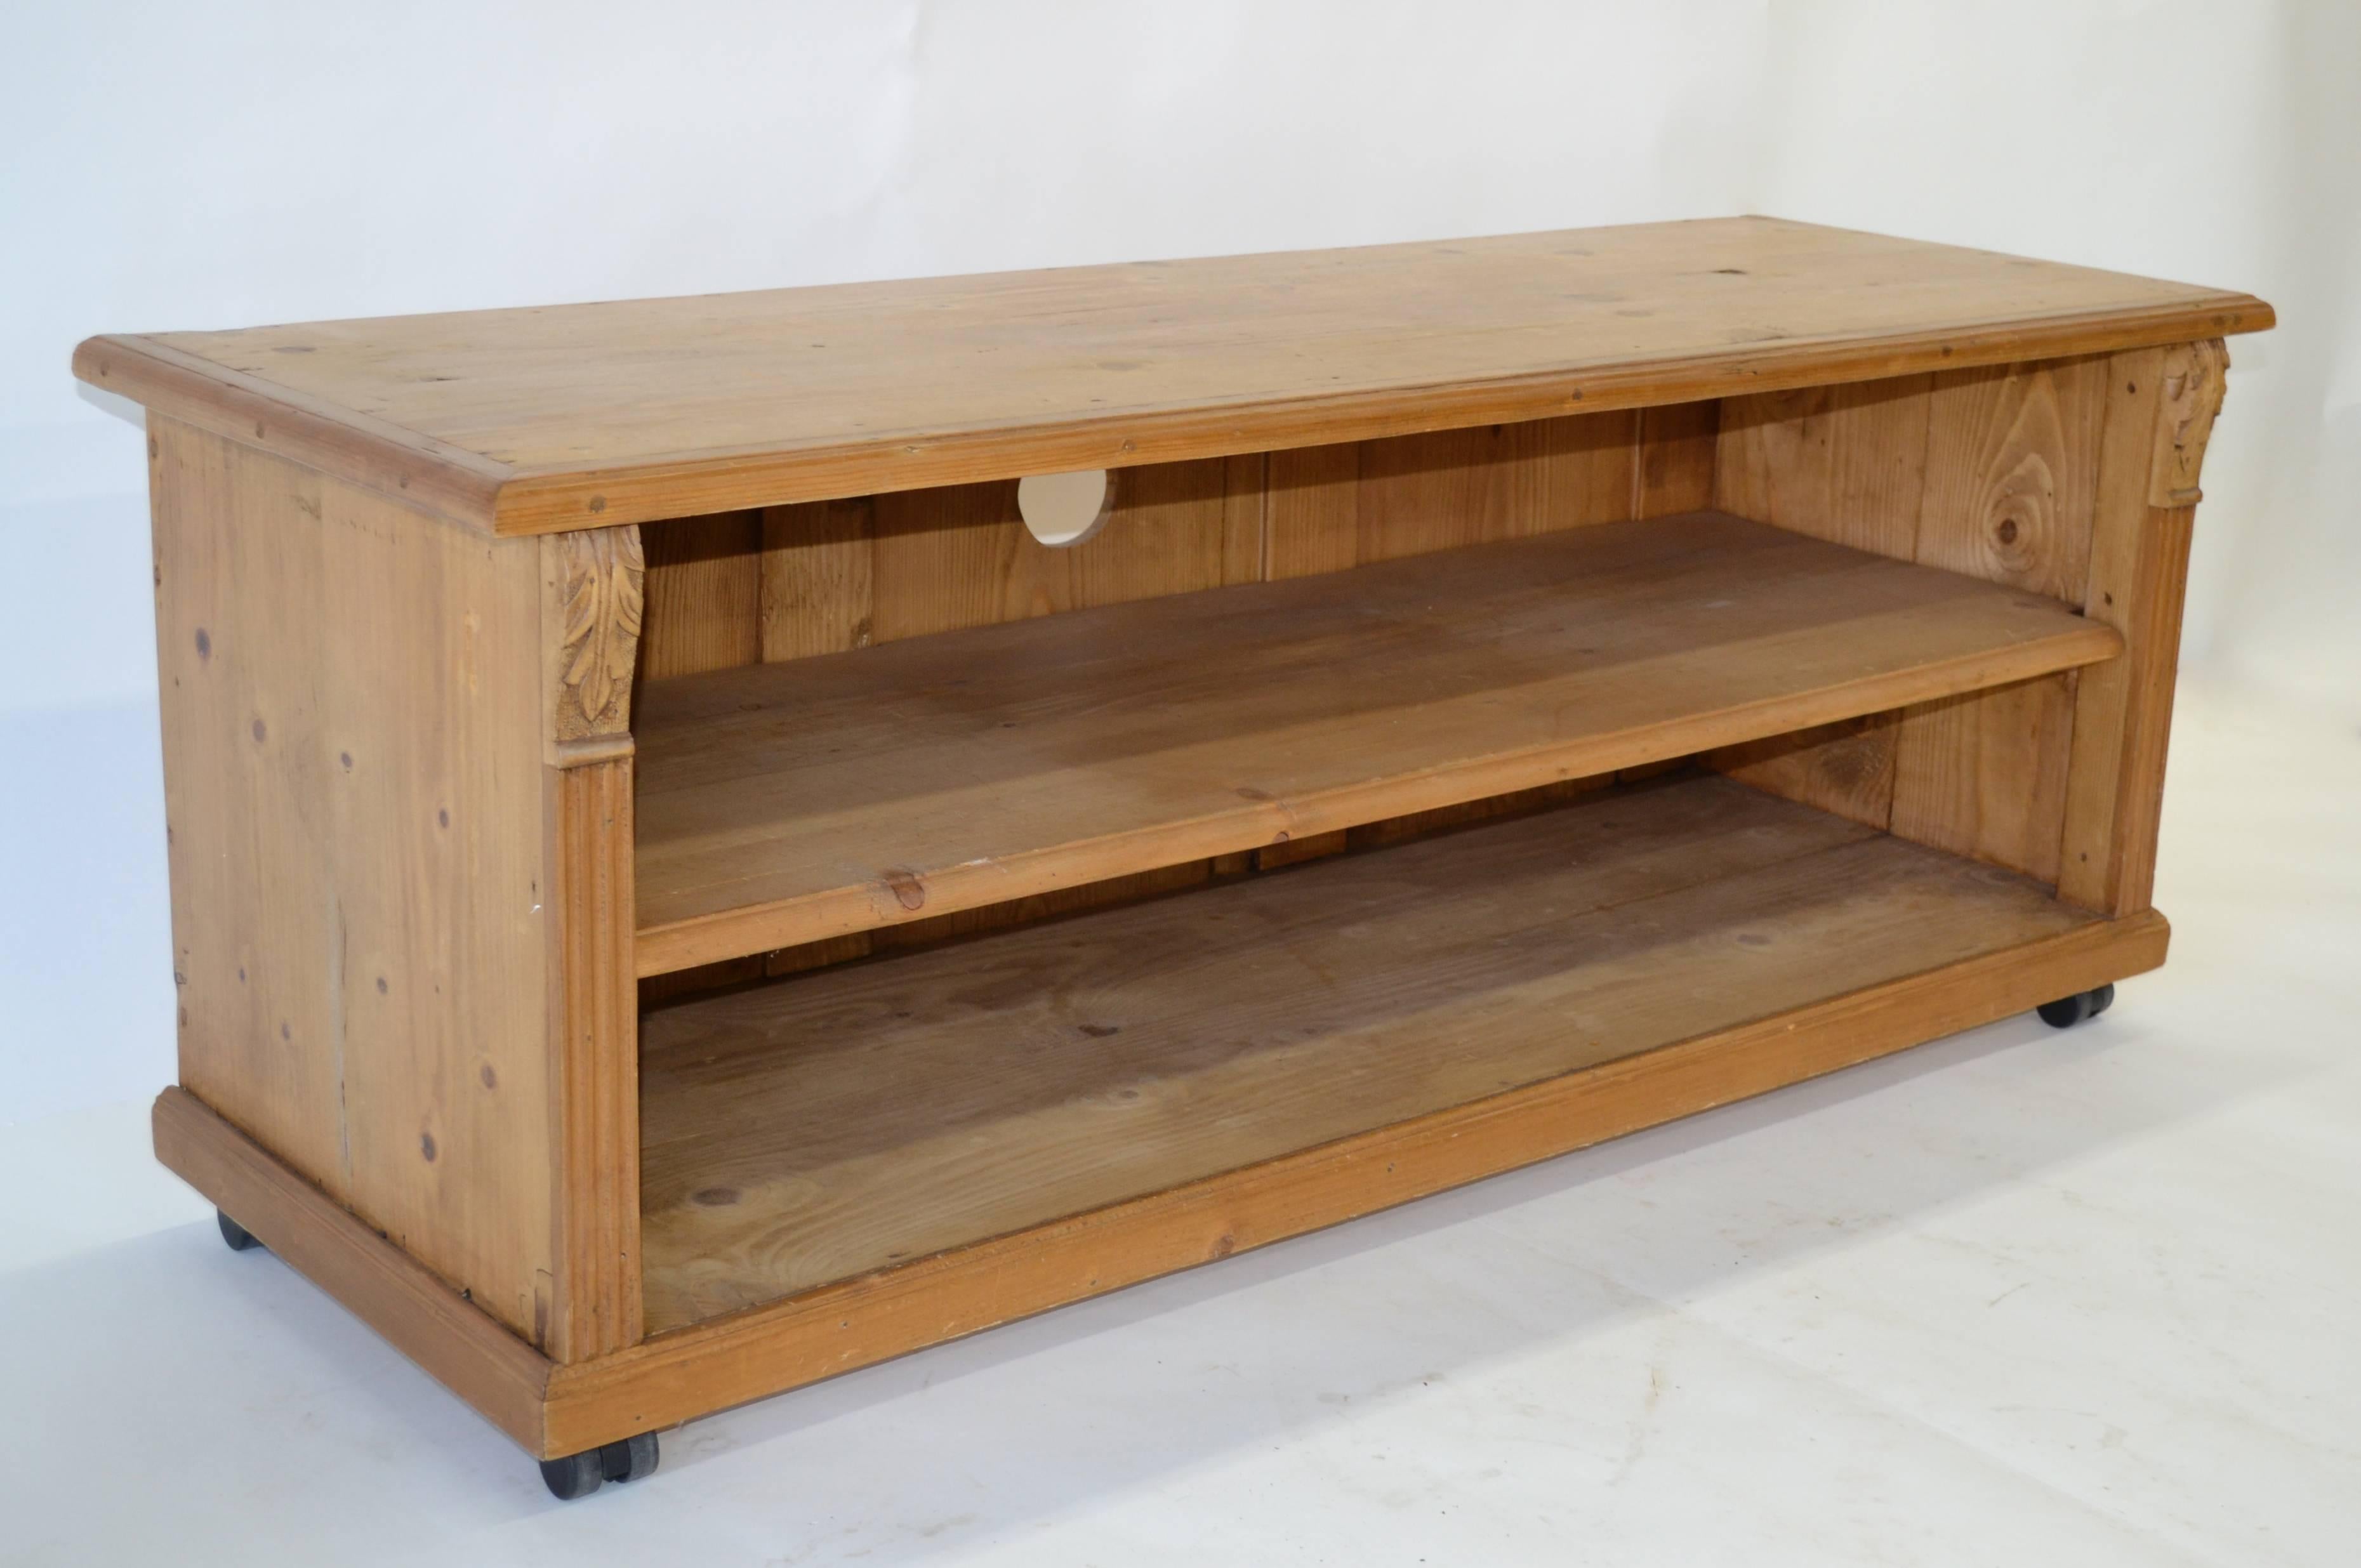 This functional and attractive TV stand is made from the salvaged remains of an ailing vintage armoire and mounted with modern casters for easy moving. The “base” is divided into two compartments for components which are bordered with fluting and